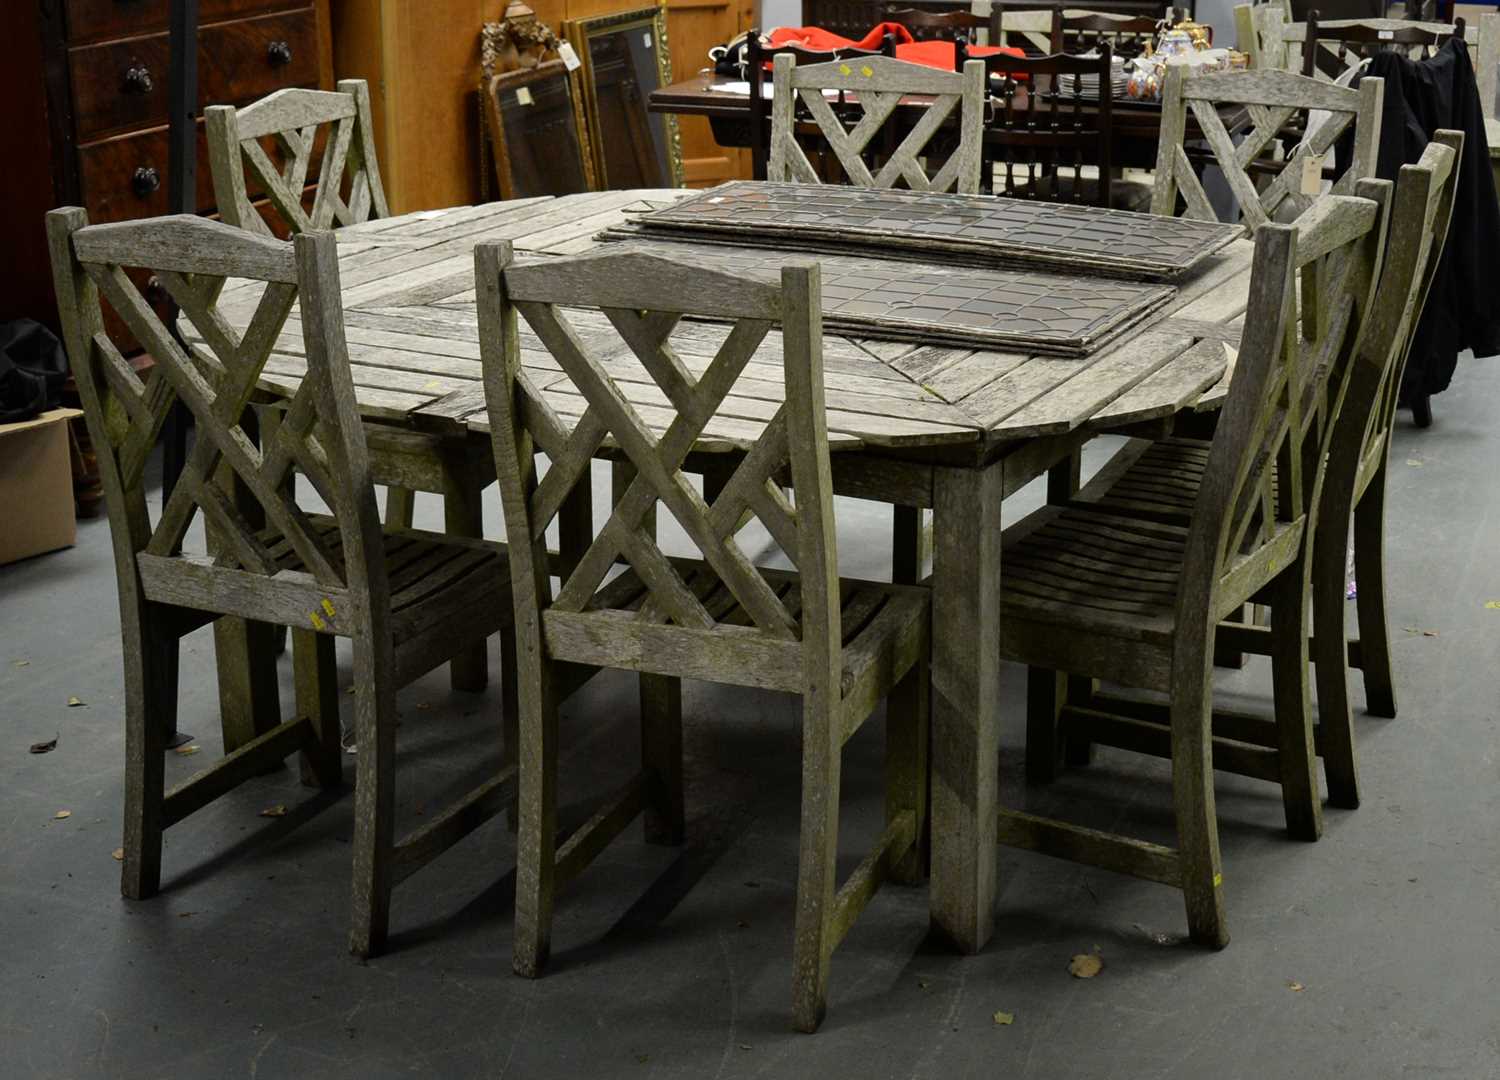 Lot 134 - A 20th Century group of garden furniture by Lister.